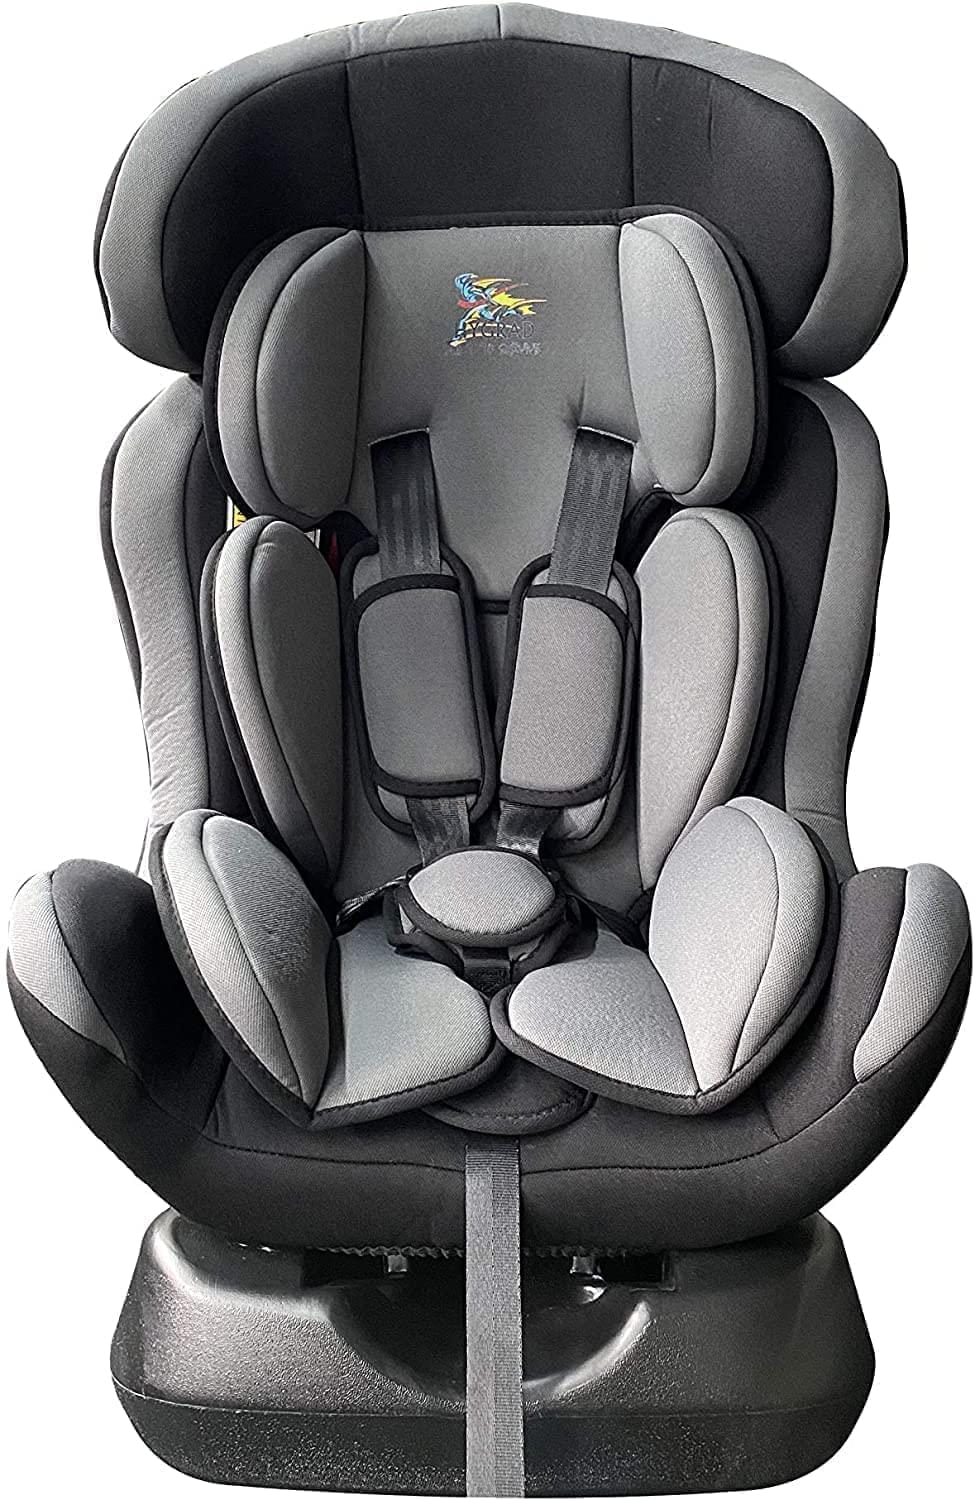 3 in 1 Child Baby Kid Car Seat with Base Booster Group 0 1 2 Birth to 5 25kg R44/04 CE Certified